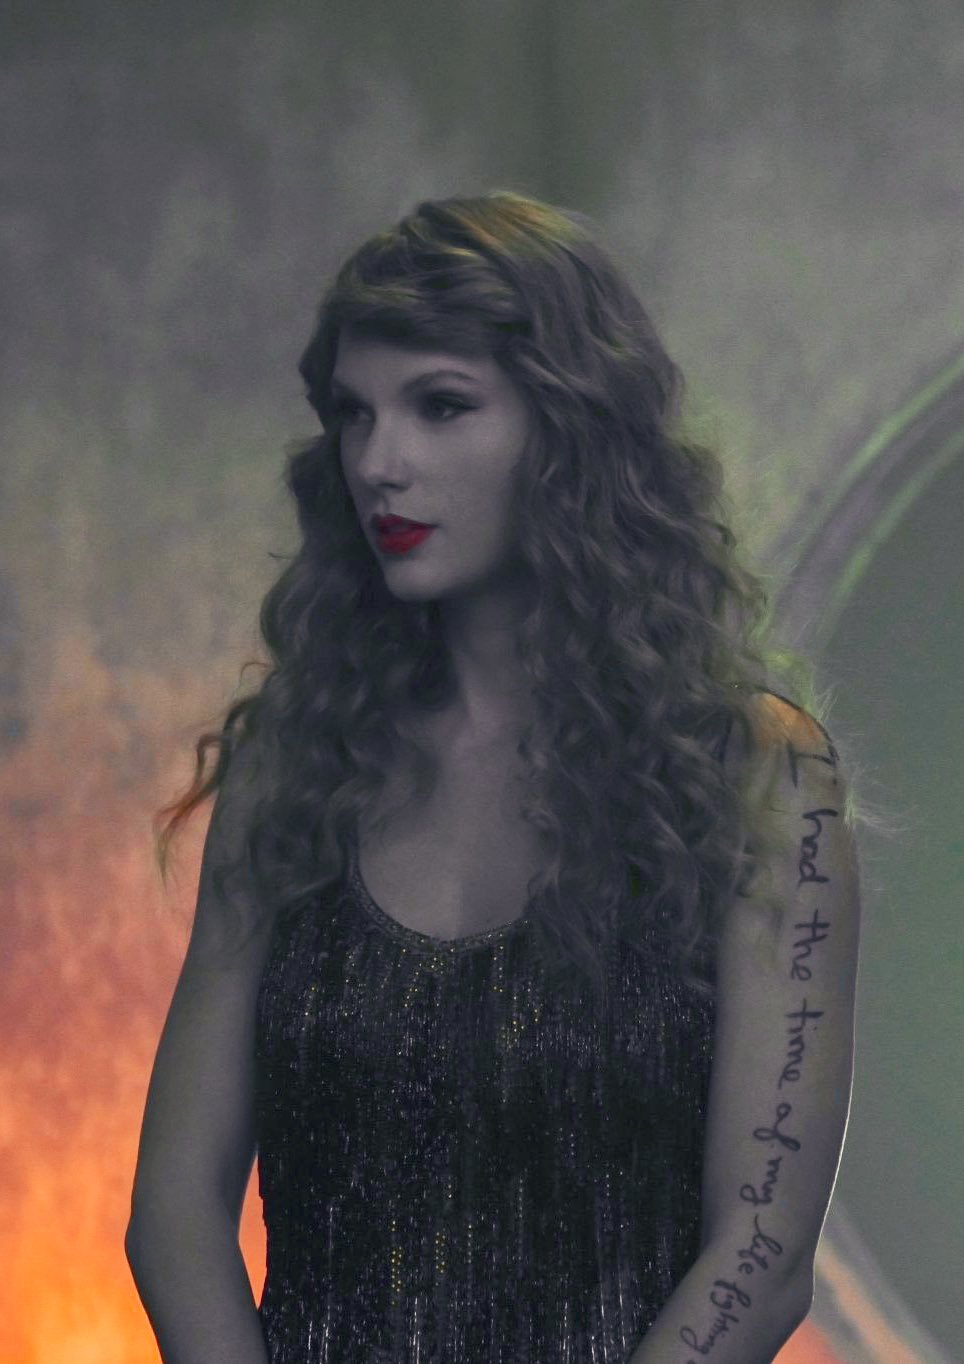 Top 9 Taylor Swift Tattoo Designs And Pictures | Styles At Life